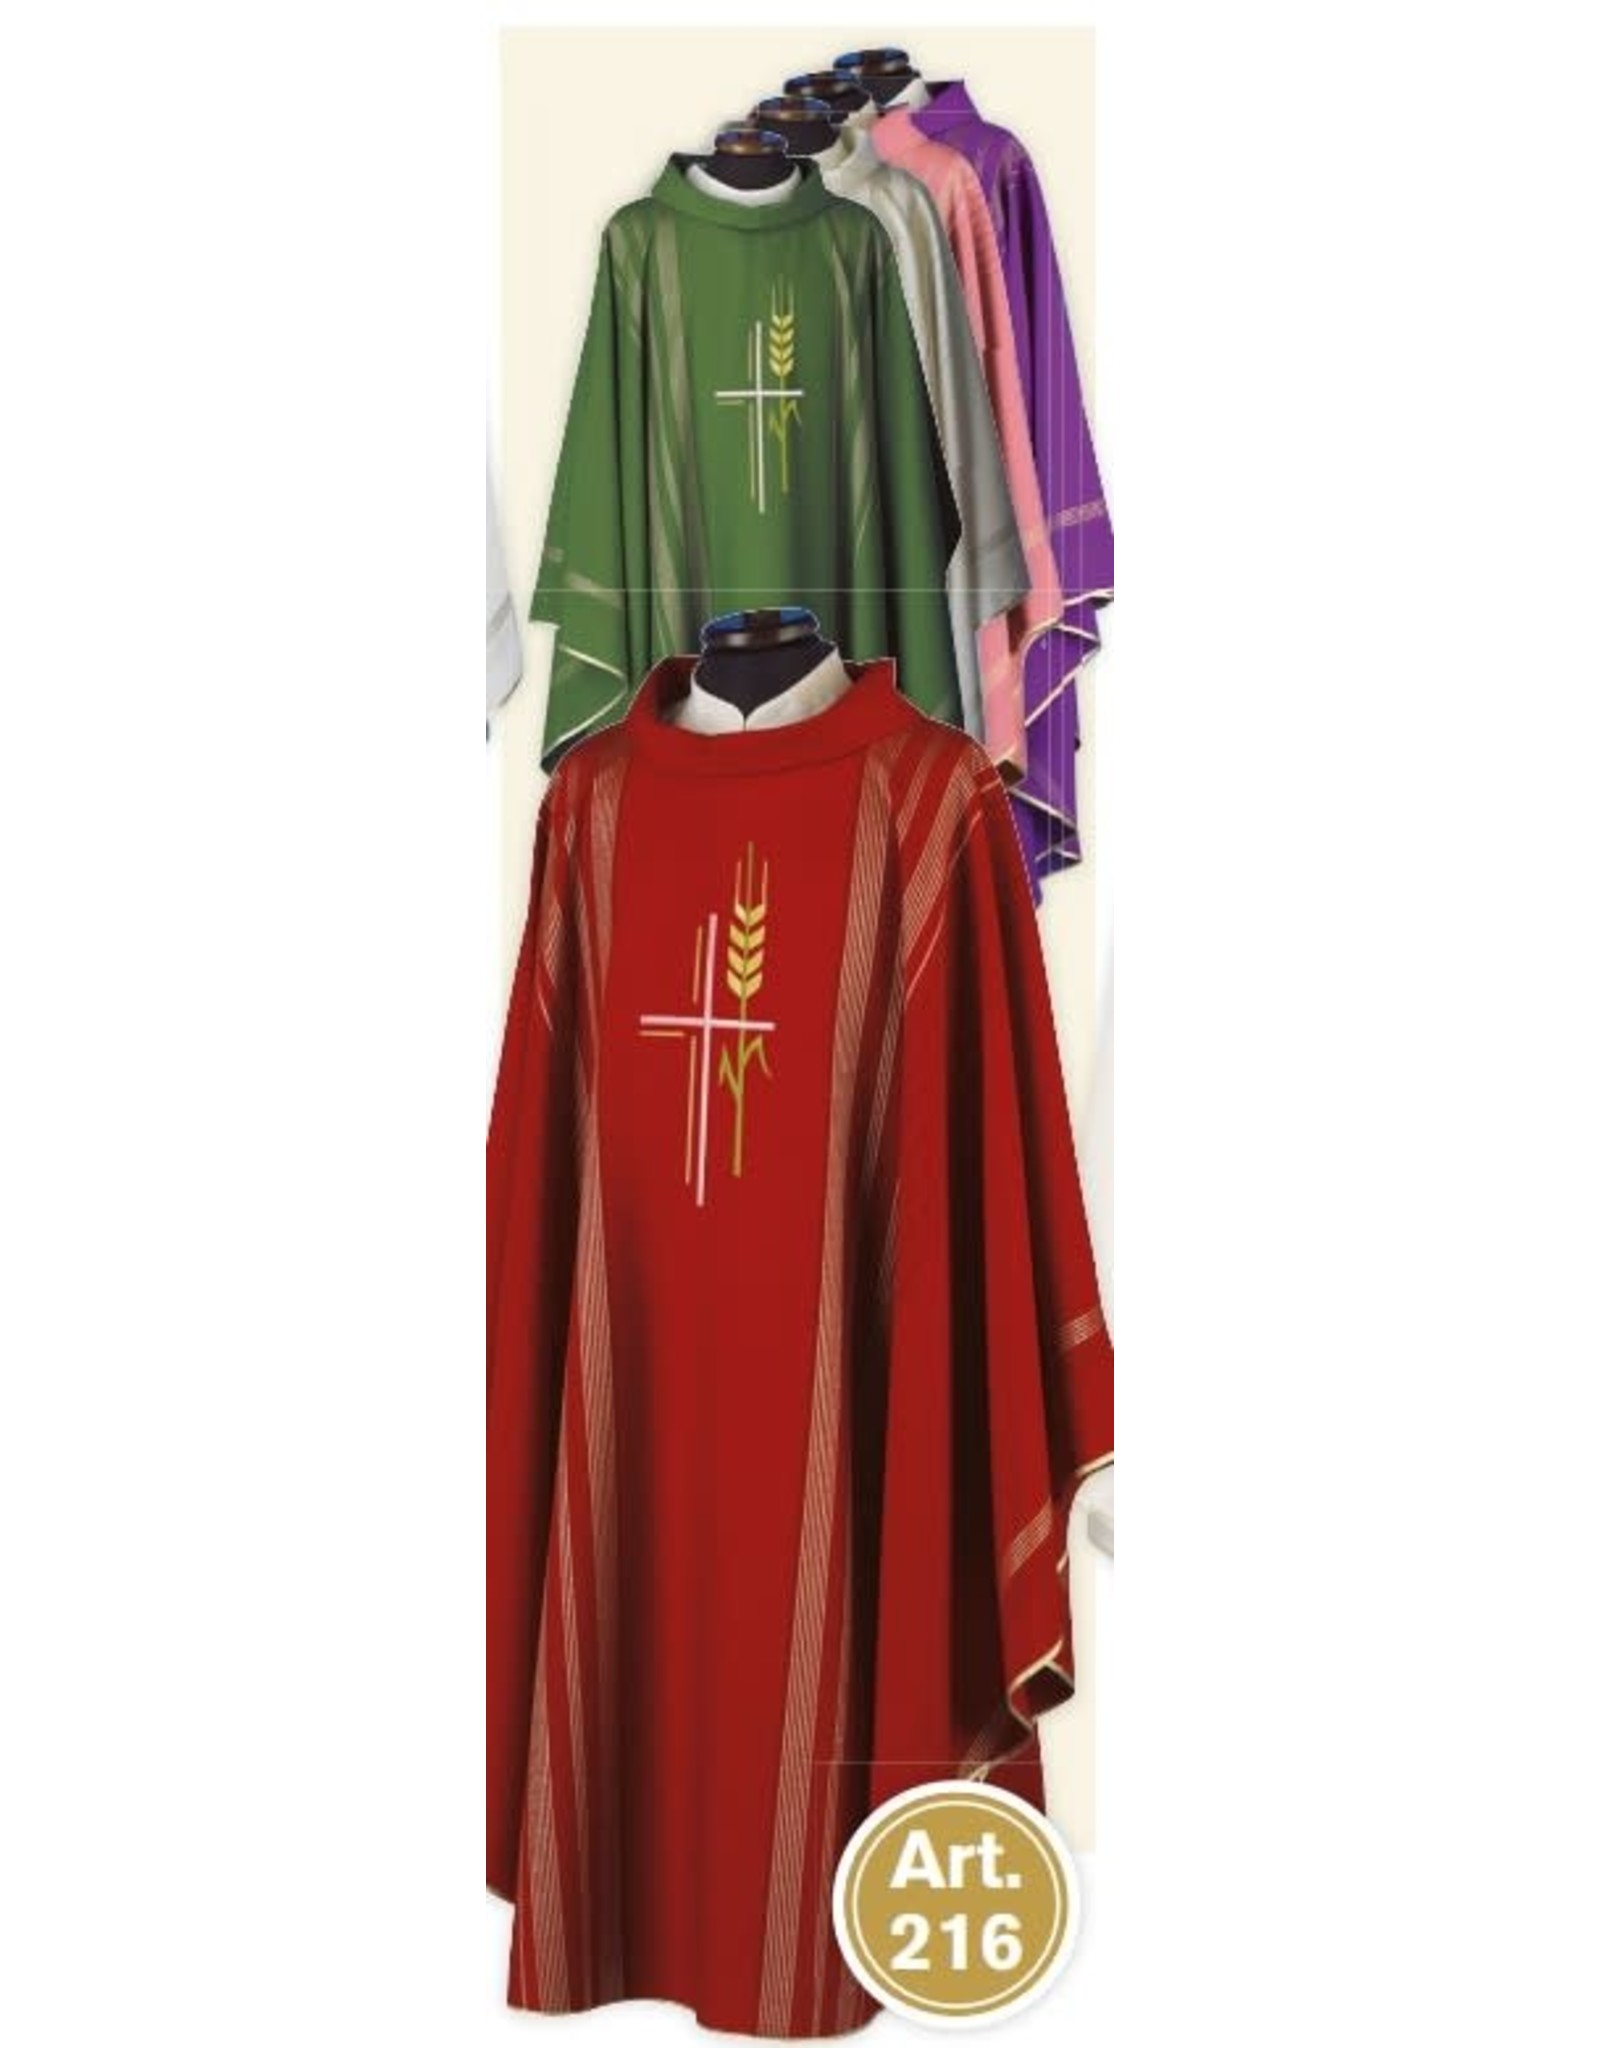 Solivari Priest Stole 216 Linea Style Fabric, Cross with Wheat